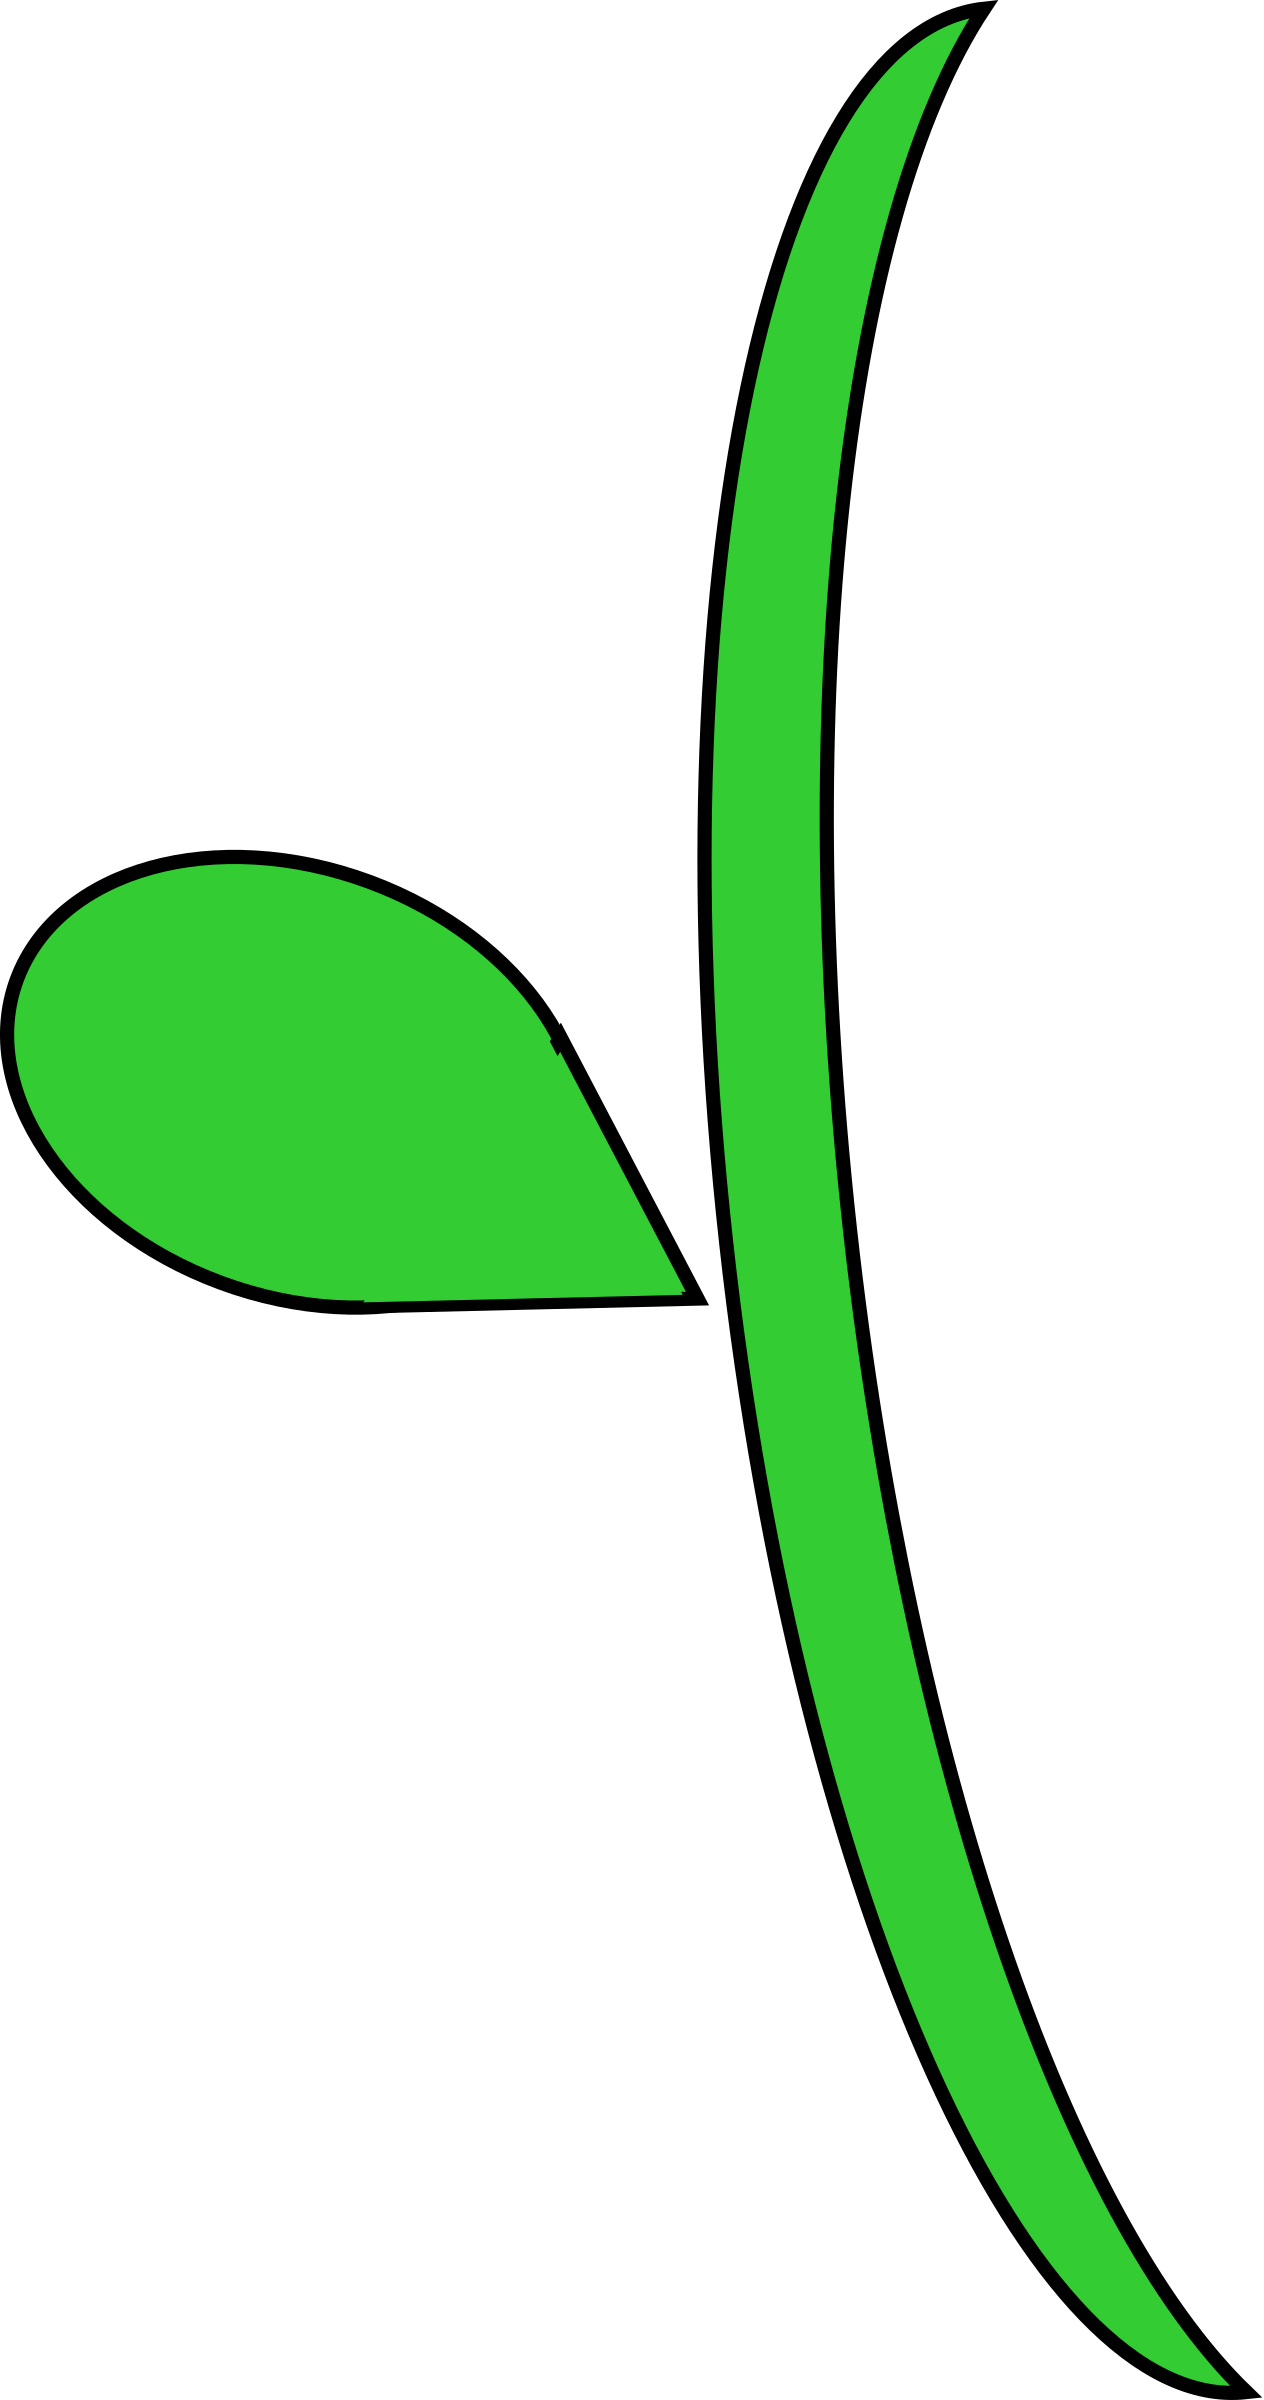 Flower Stem With Leaves - ClipArt Best